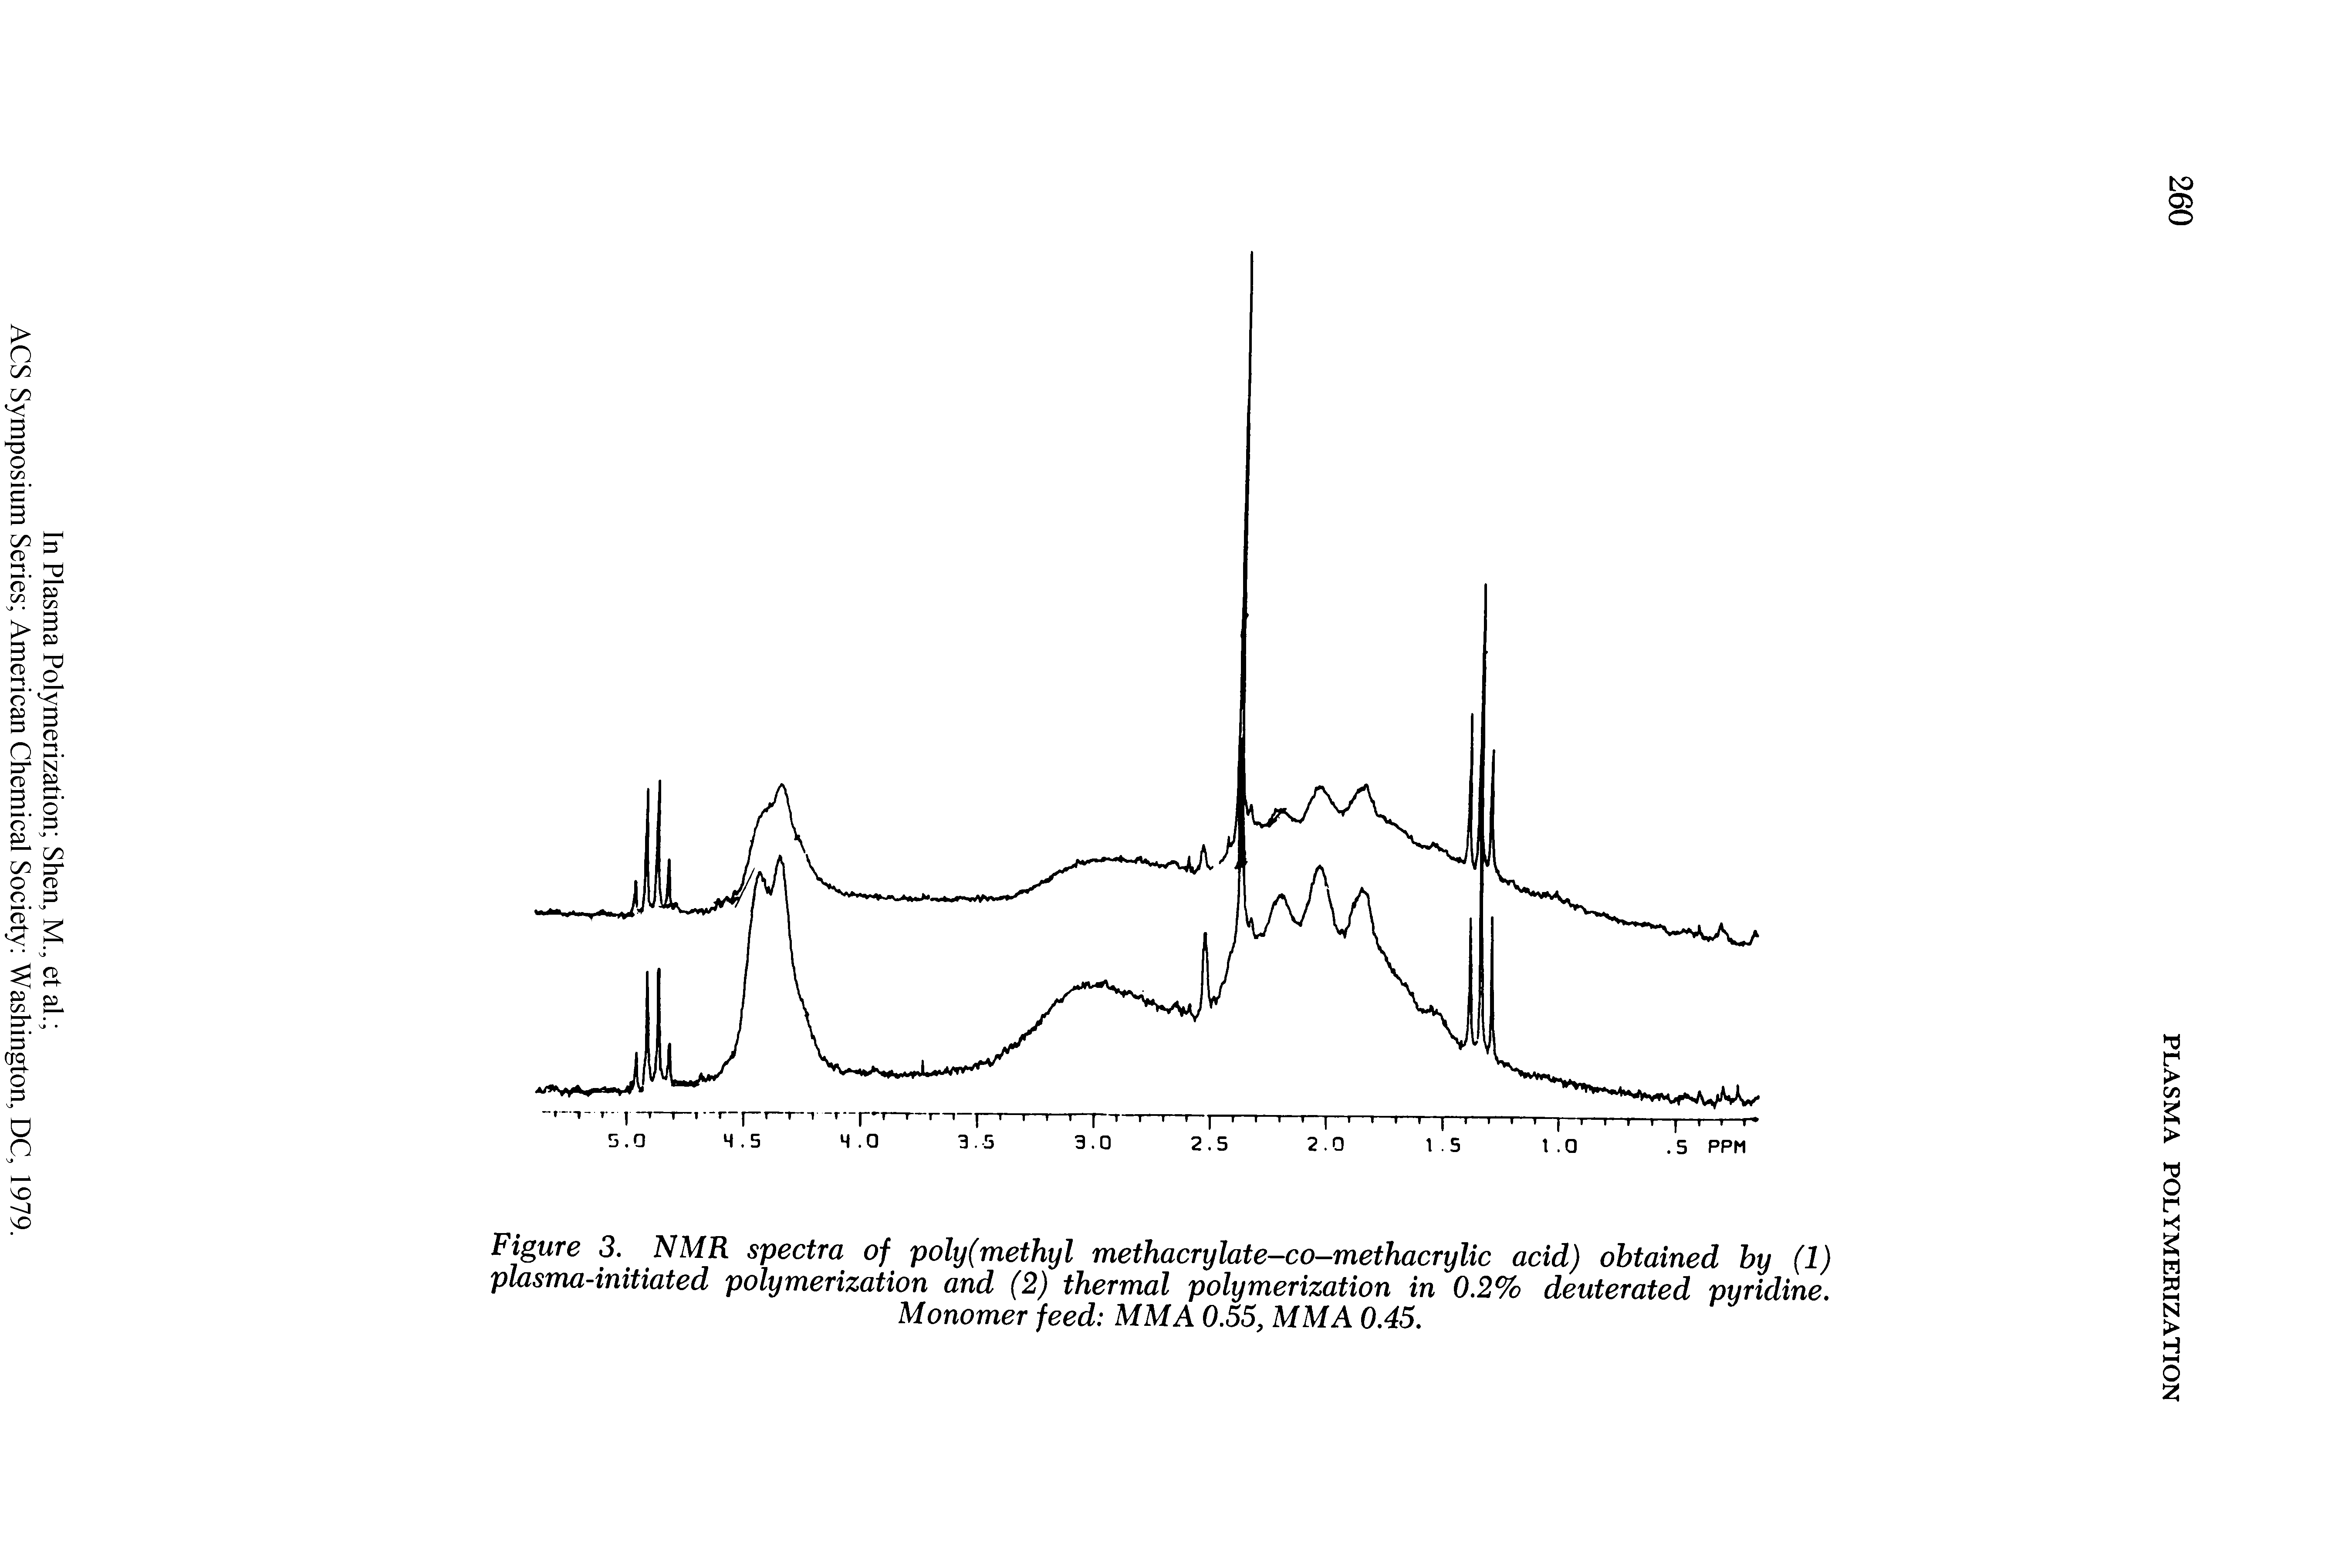 Figure 3. NMR spectra of poly(methyl methacrylate-co-methacrylic acid) obtained by (1) plasma-initiated polymerization and (2) thermal polymerization in 0.2% deuterated pyridine.